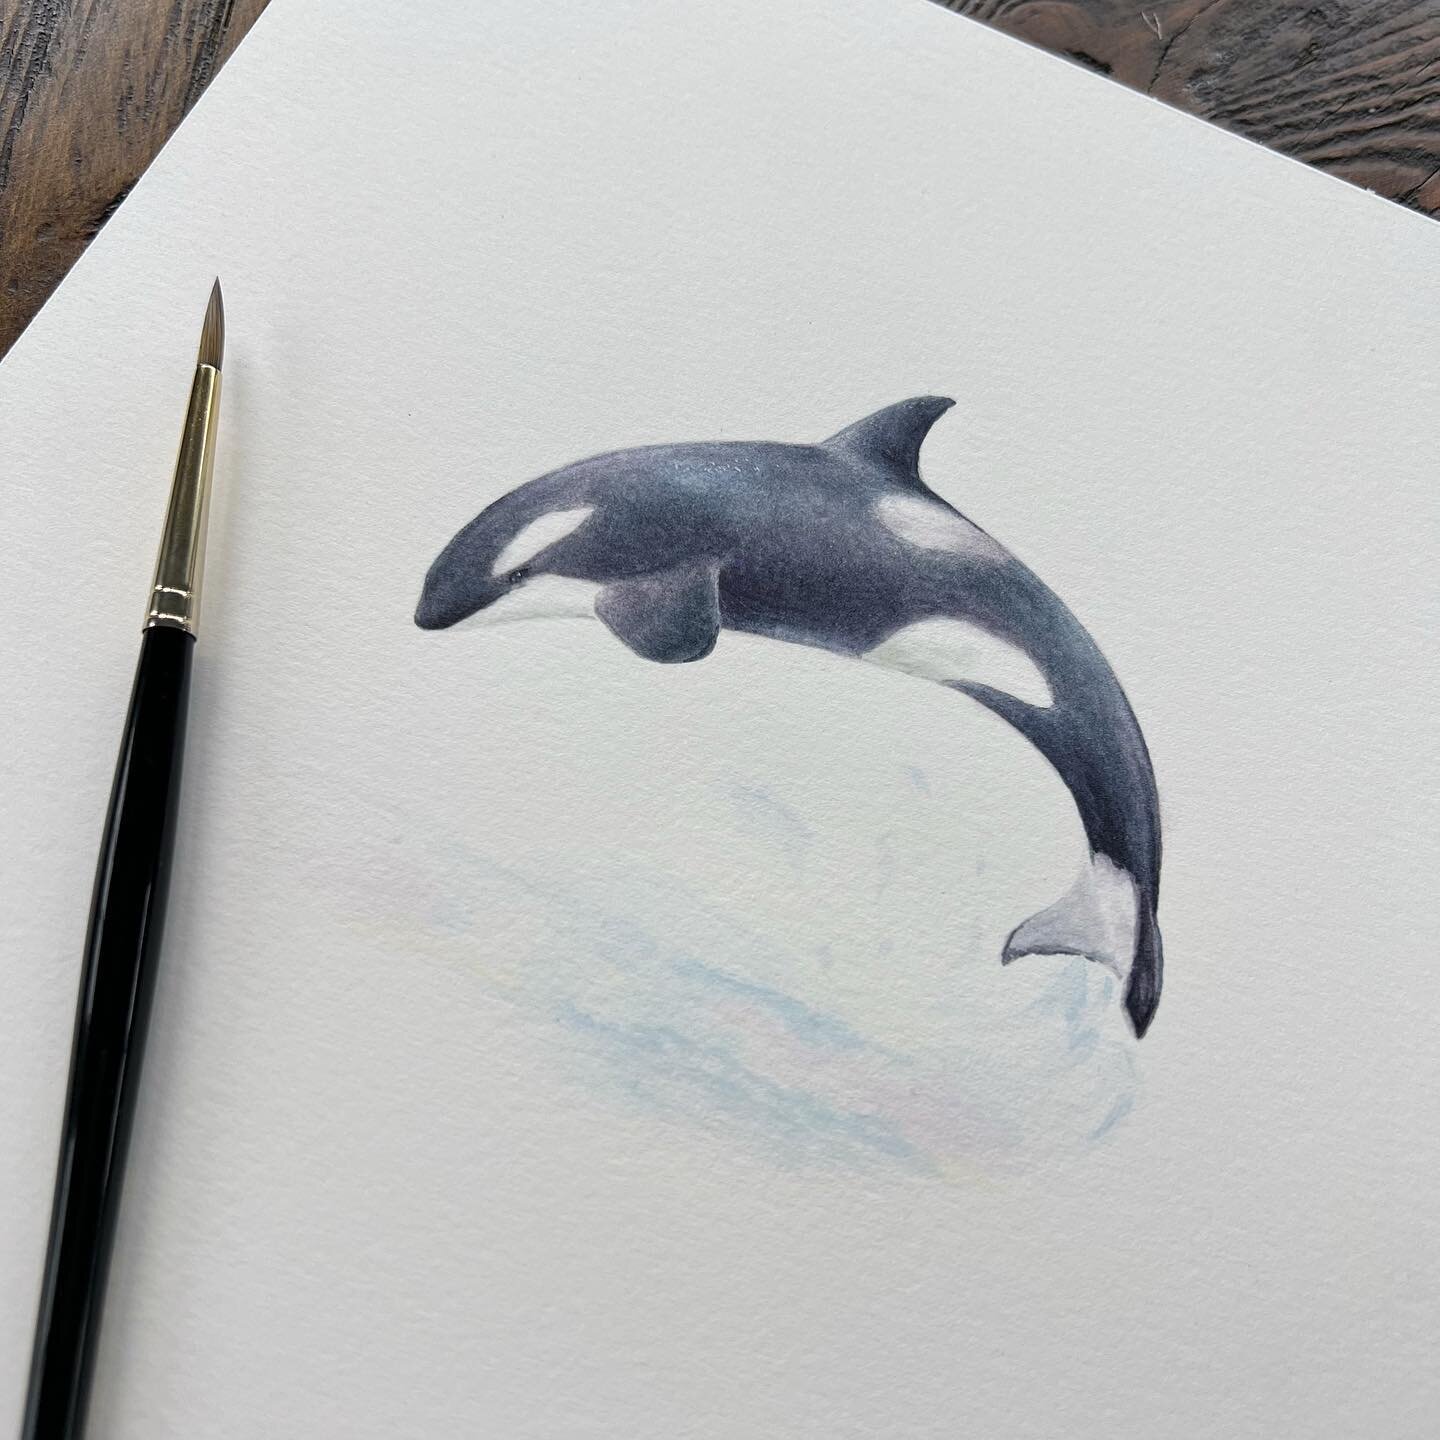 Another &lsquo;Jaws-inspired&rsquo; piece that will be at this week&rsquo;s art show at @kjeldmahoney_afterglowfineart 🦈 Swipe for more views of this wee orca &mdash; do you know what the Jaws connection is?
.
&lsquo;Splish Splash&rsquo; (Orca)
Wate